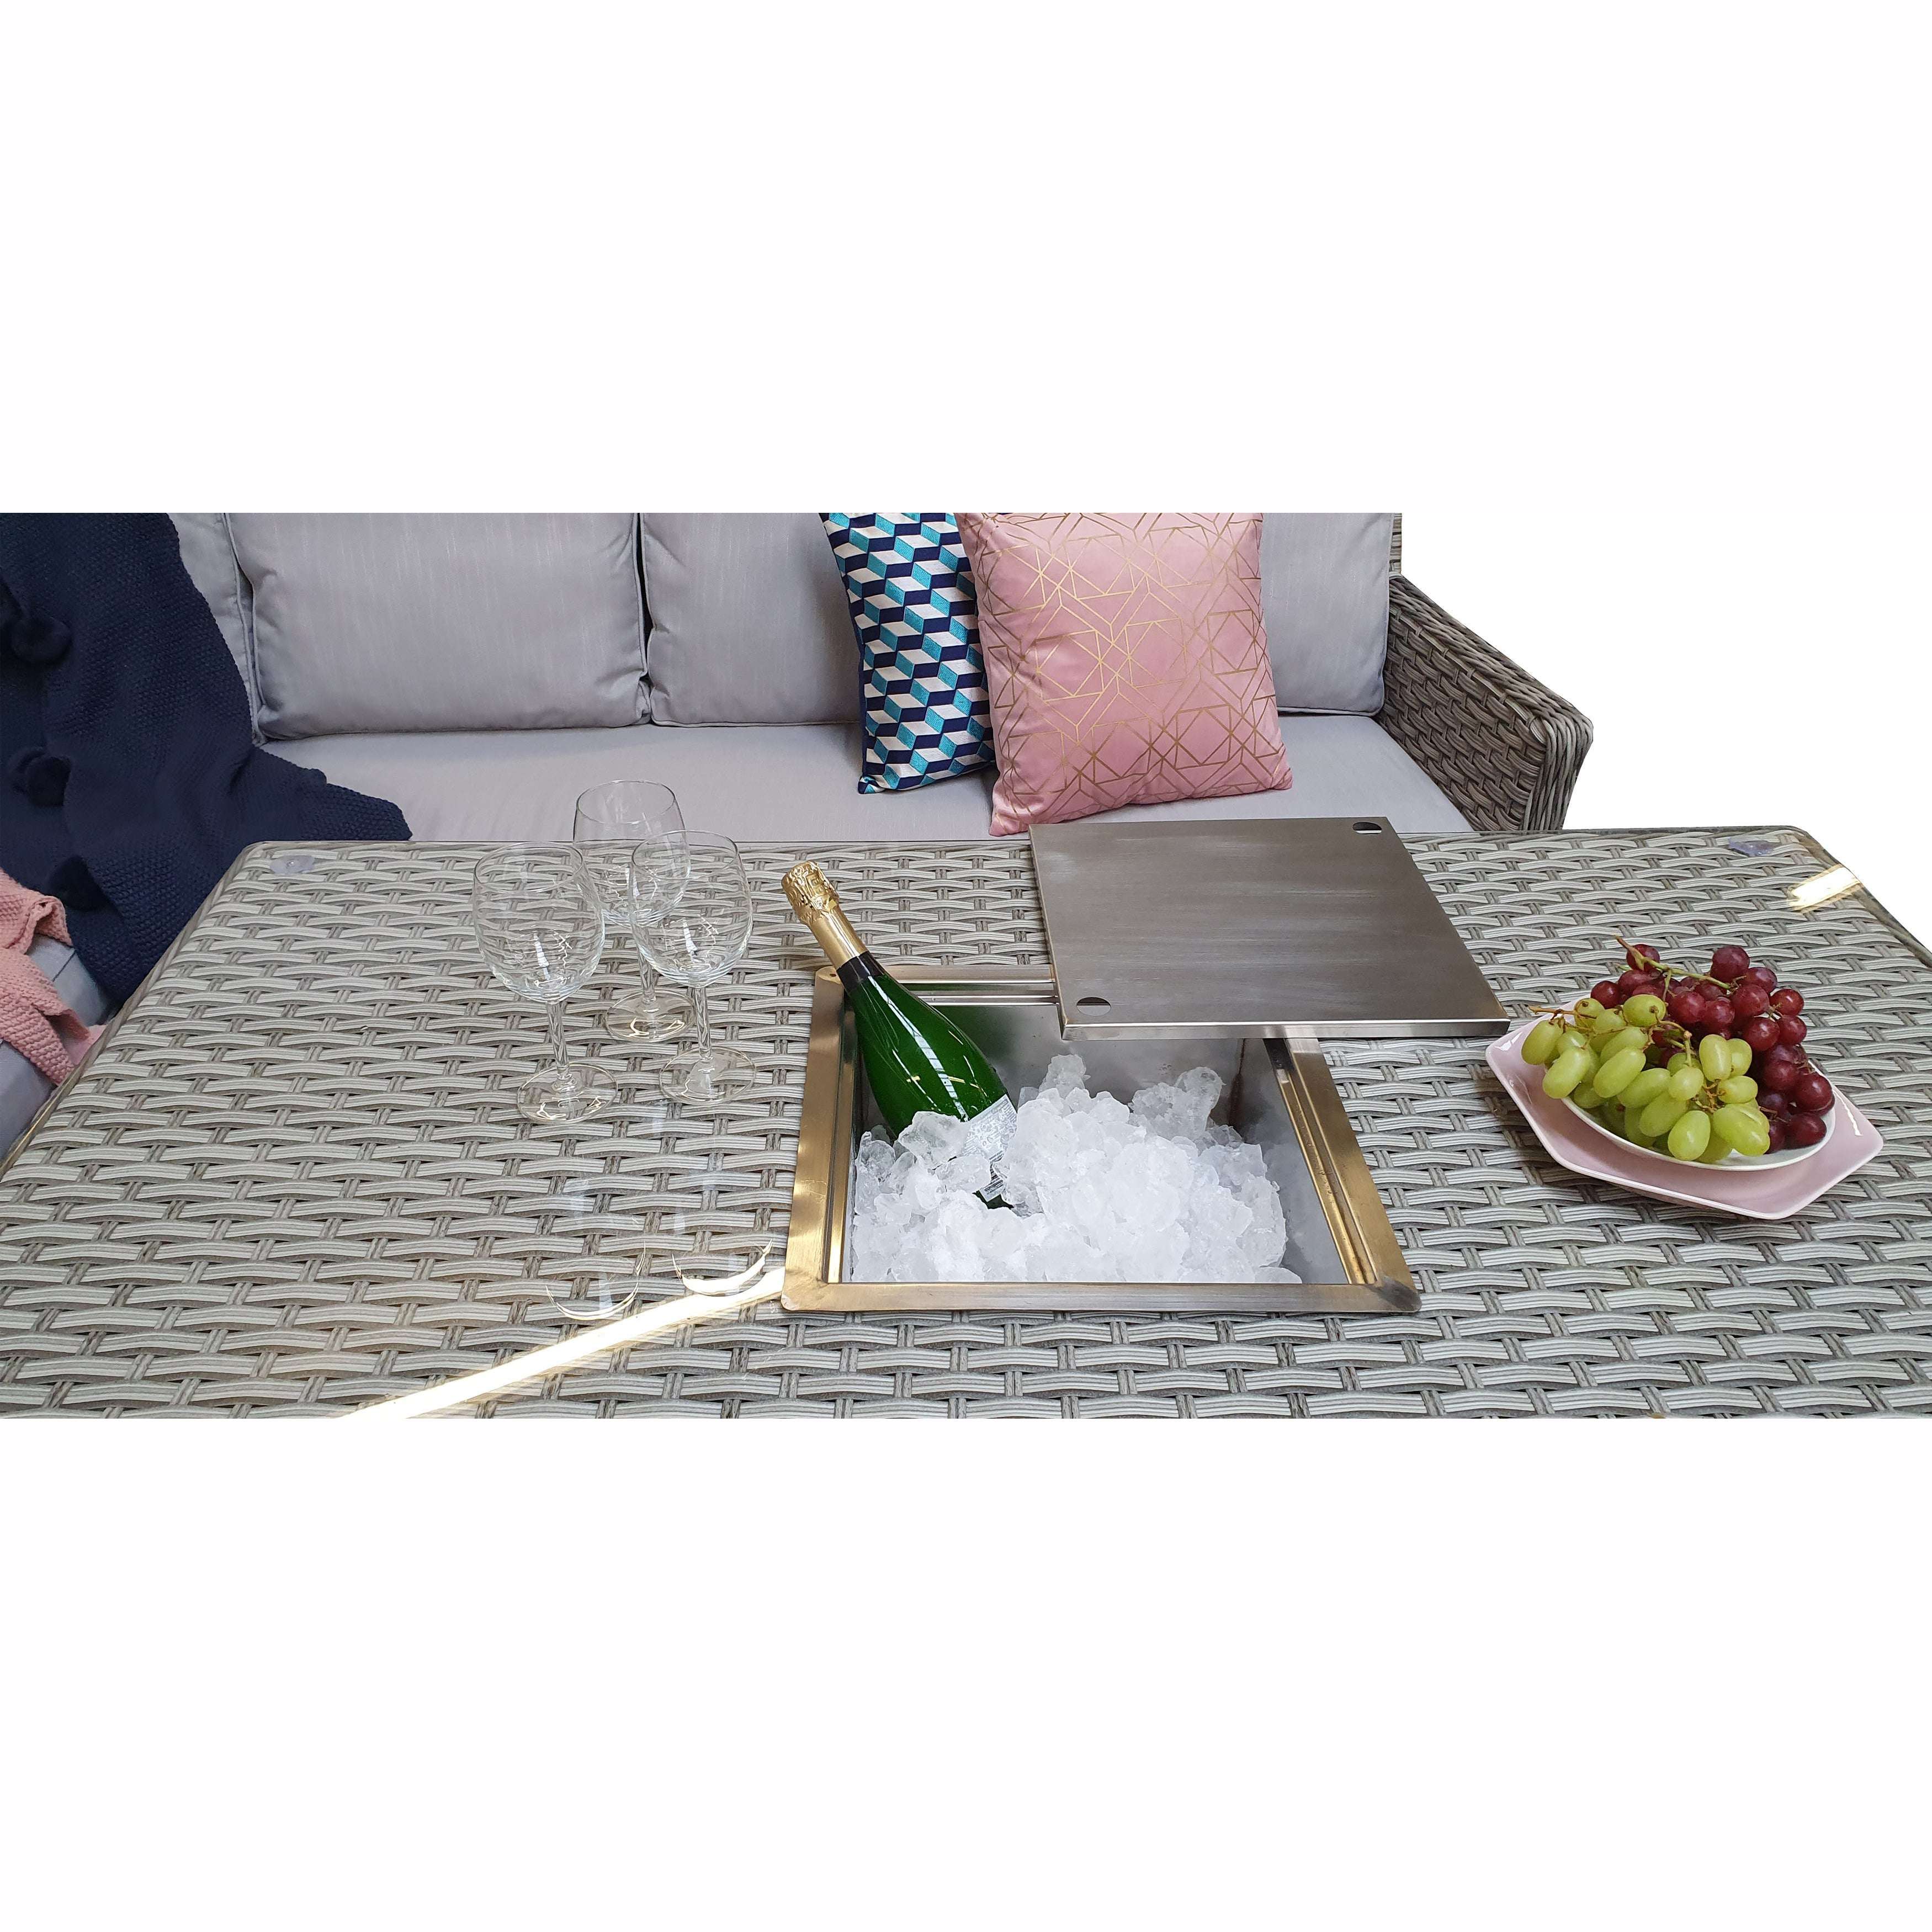 Exceptional Garden:Signature Weave Edwina Corner Dining Set with Lift Table and Ice bucket- 3 Special Wicker Grey